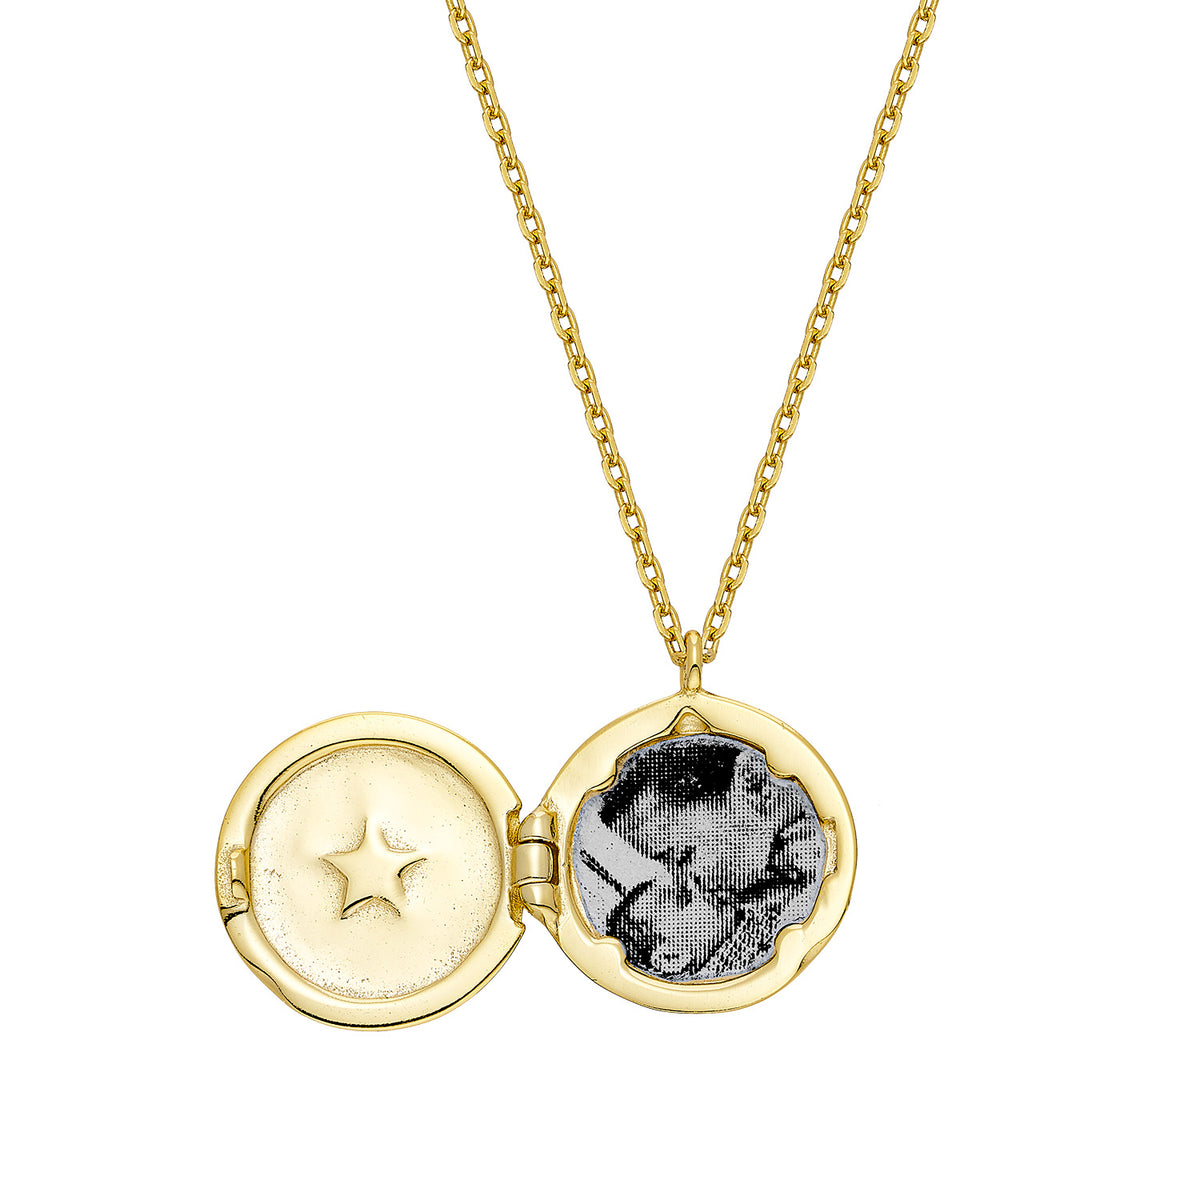 Mellonia | Pernambuco Necklace | White CZ | Gold Plated 925 Silver